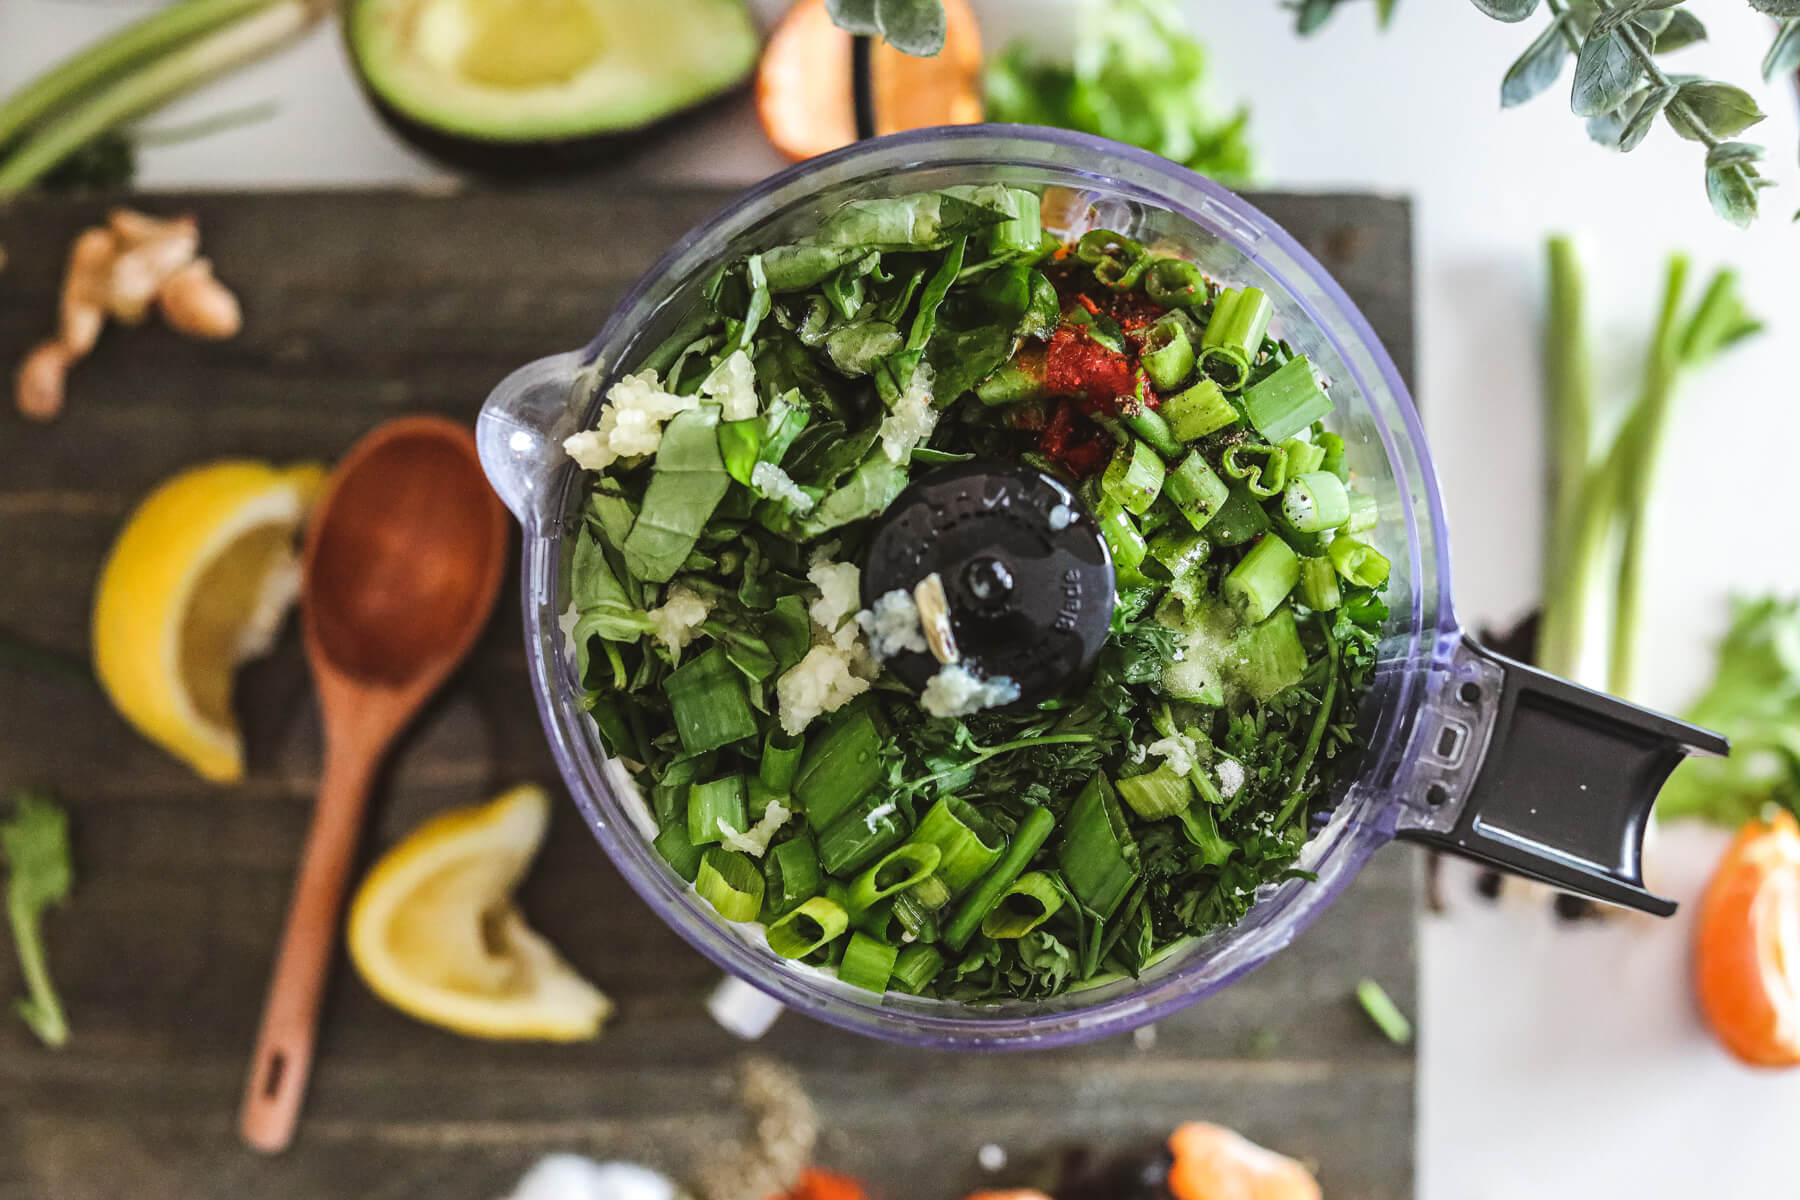 A food process full of fresh herbs and ingredients for Green Goddess Dressing.